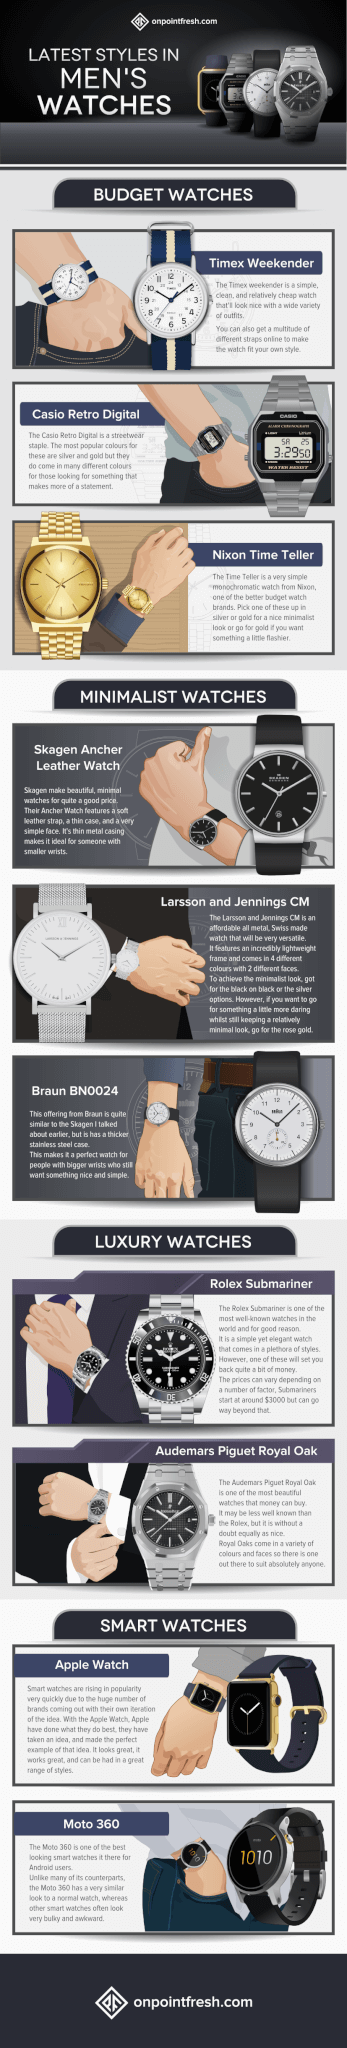 mens watches infographic